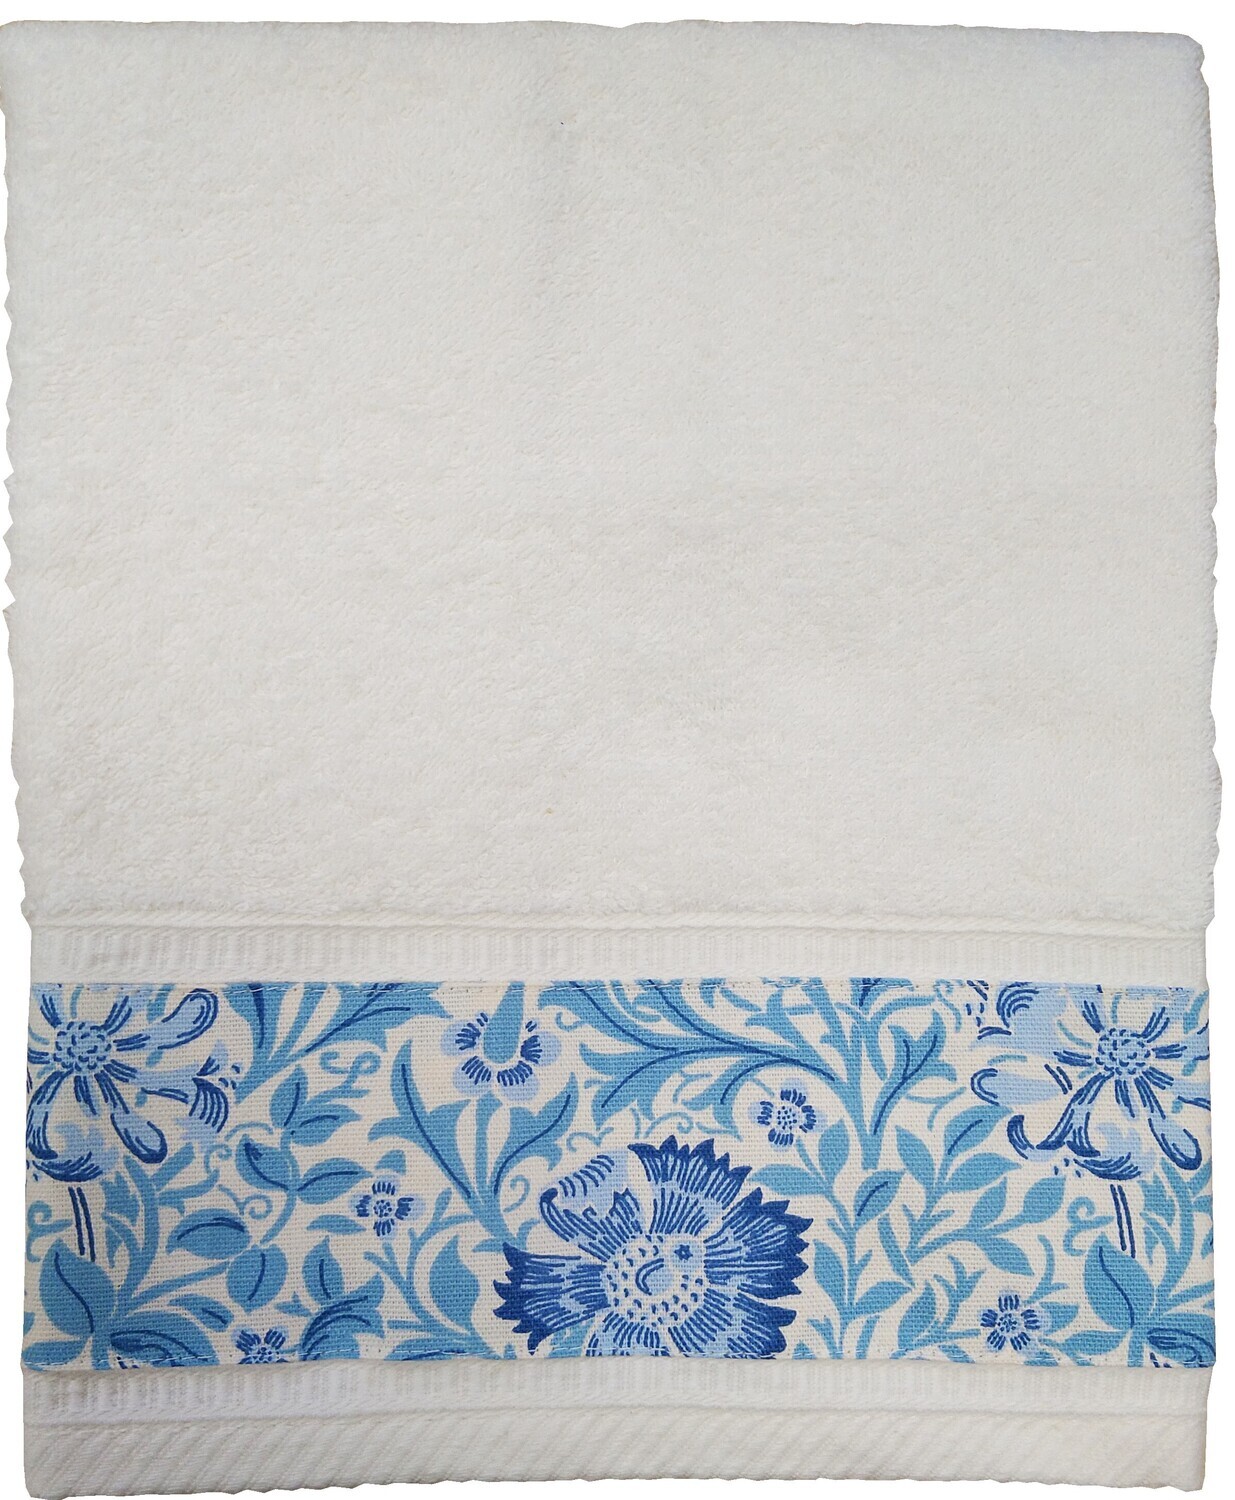 COMPTON BLUE - TRIMMED HAND TOWEL